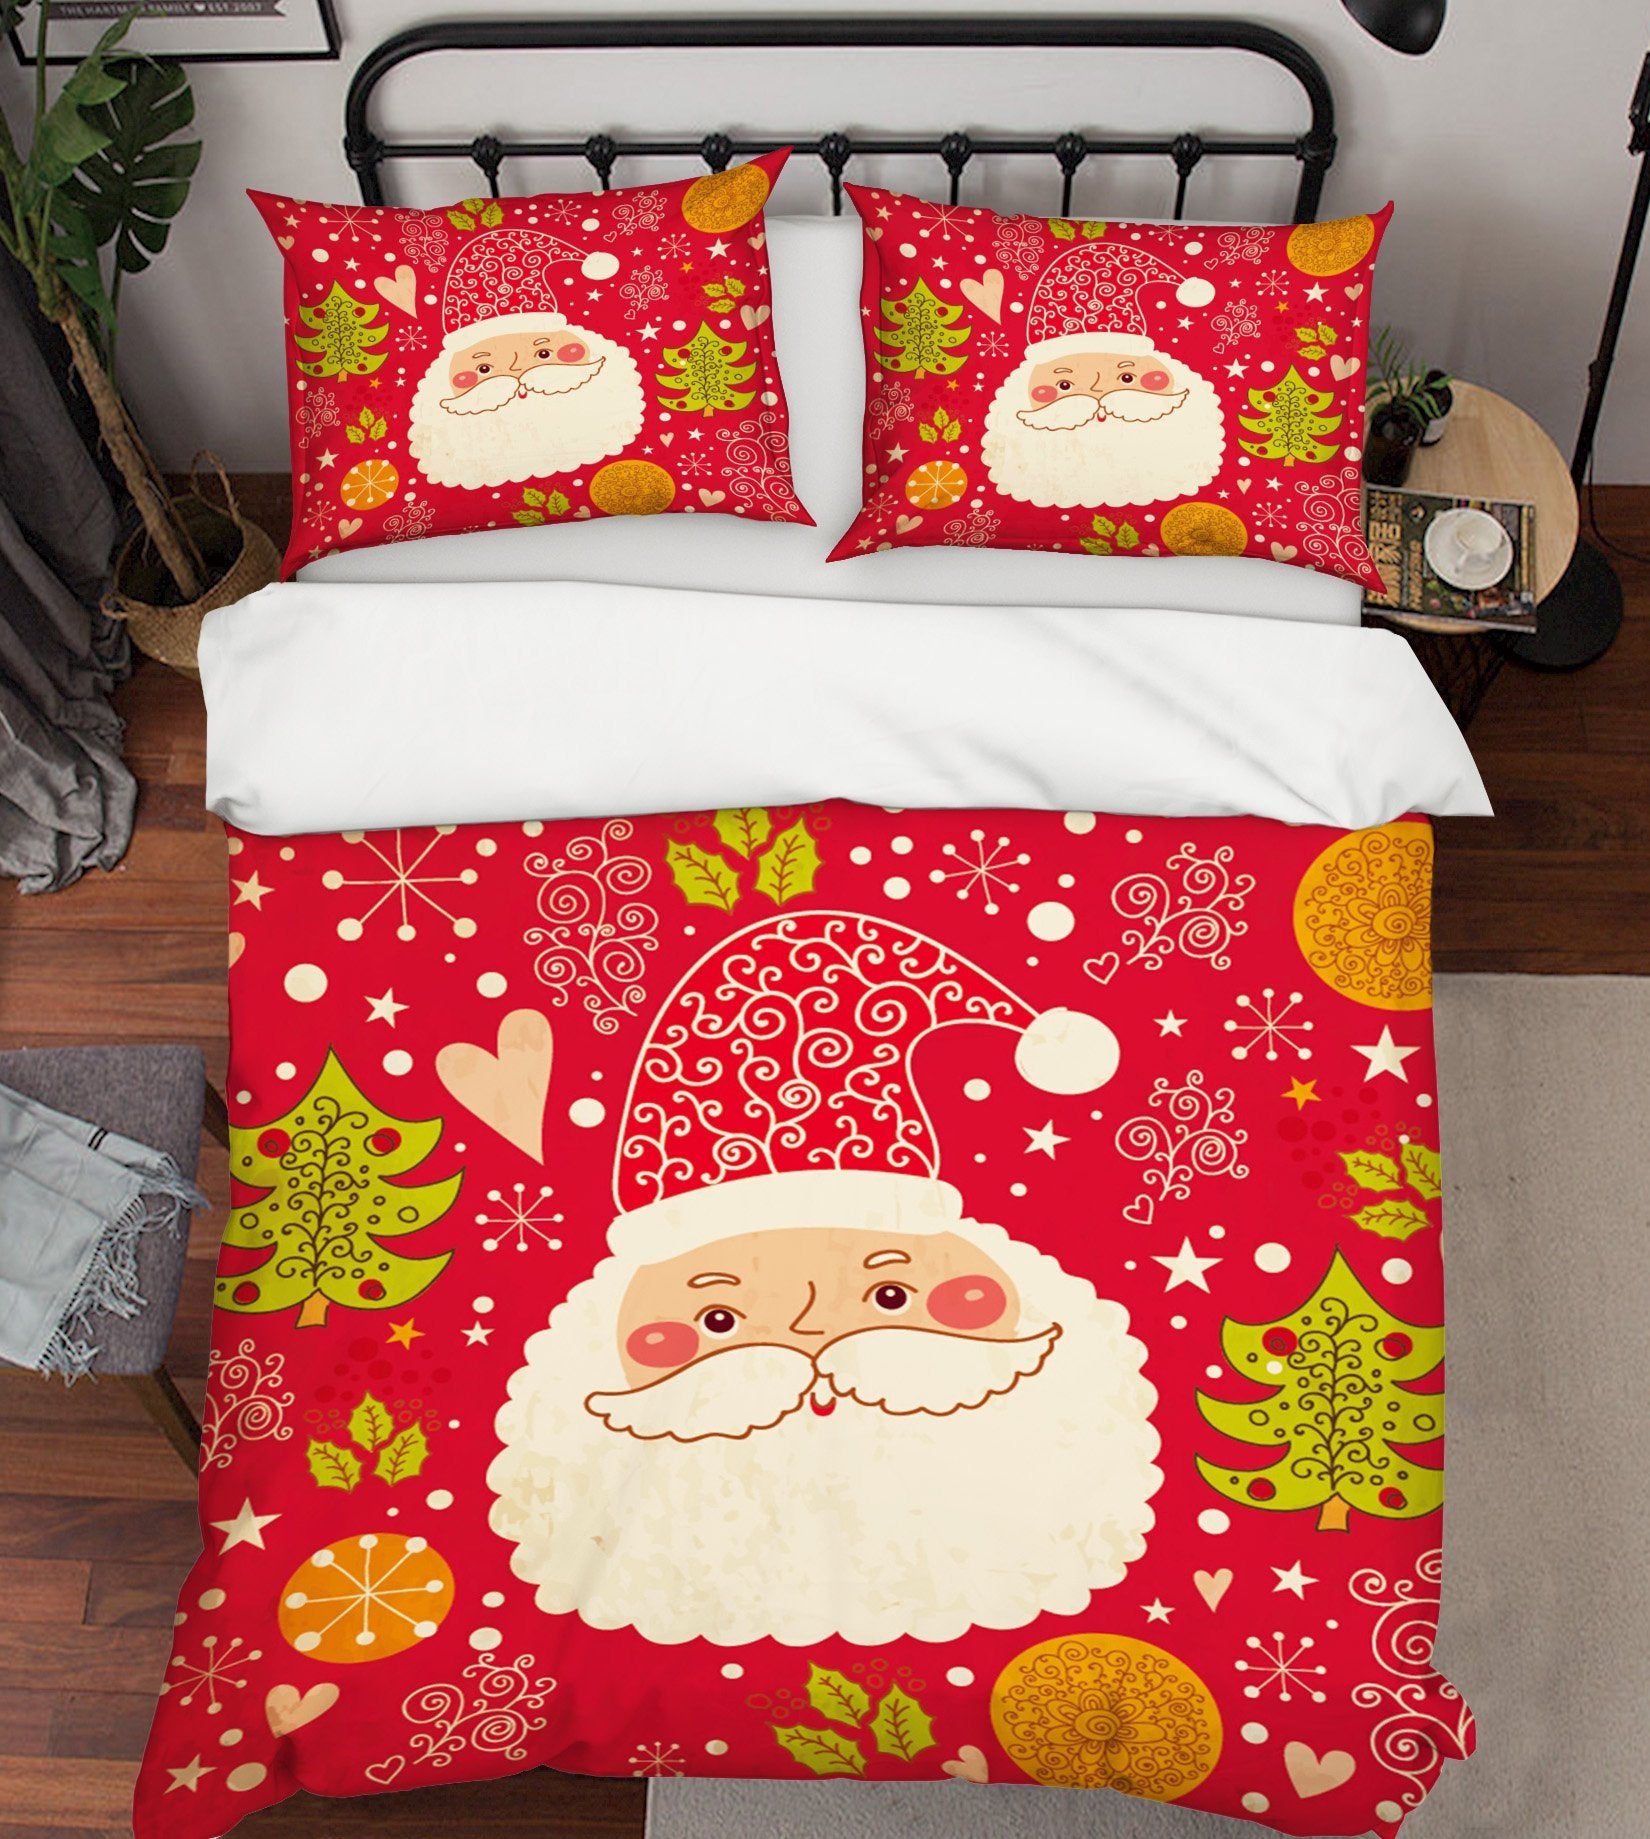 3D Christmas Happy Old Man 44 Bed Pillowcases Quilt Quiet Covers AJ Creativity Home 